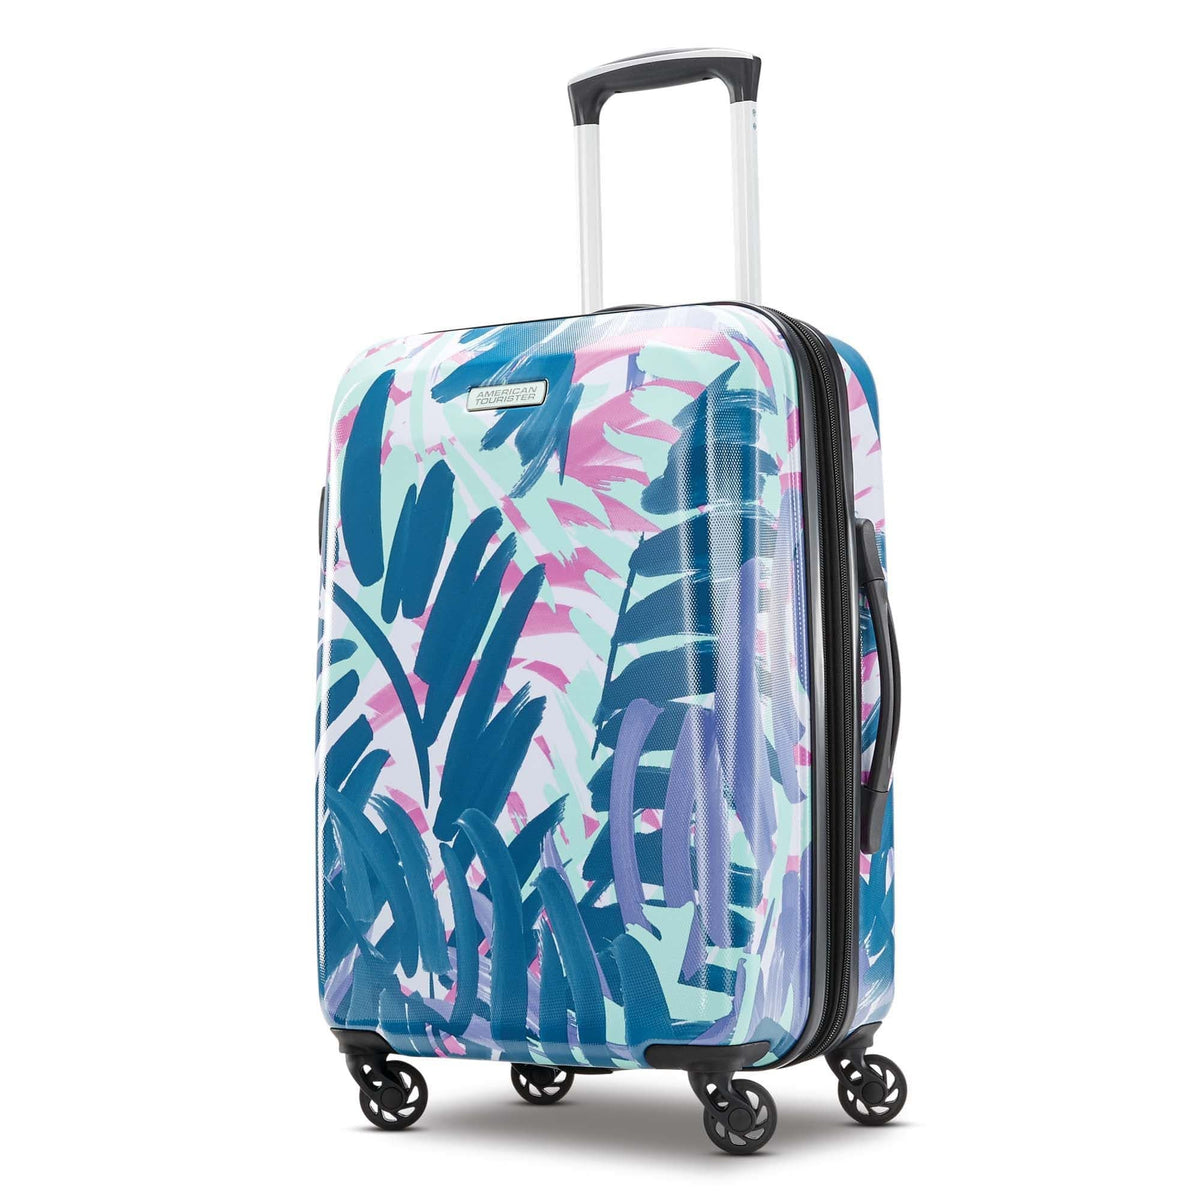 American Tourister Moonlight 21" Spinner Luggage